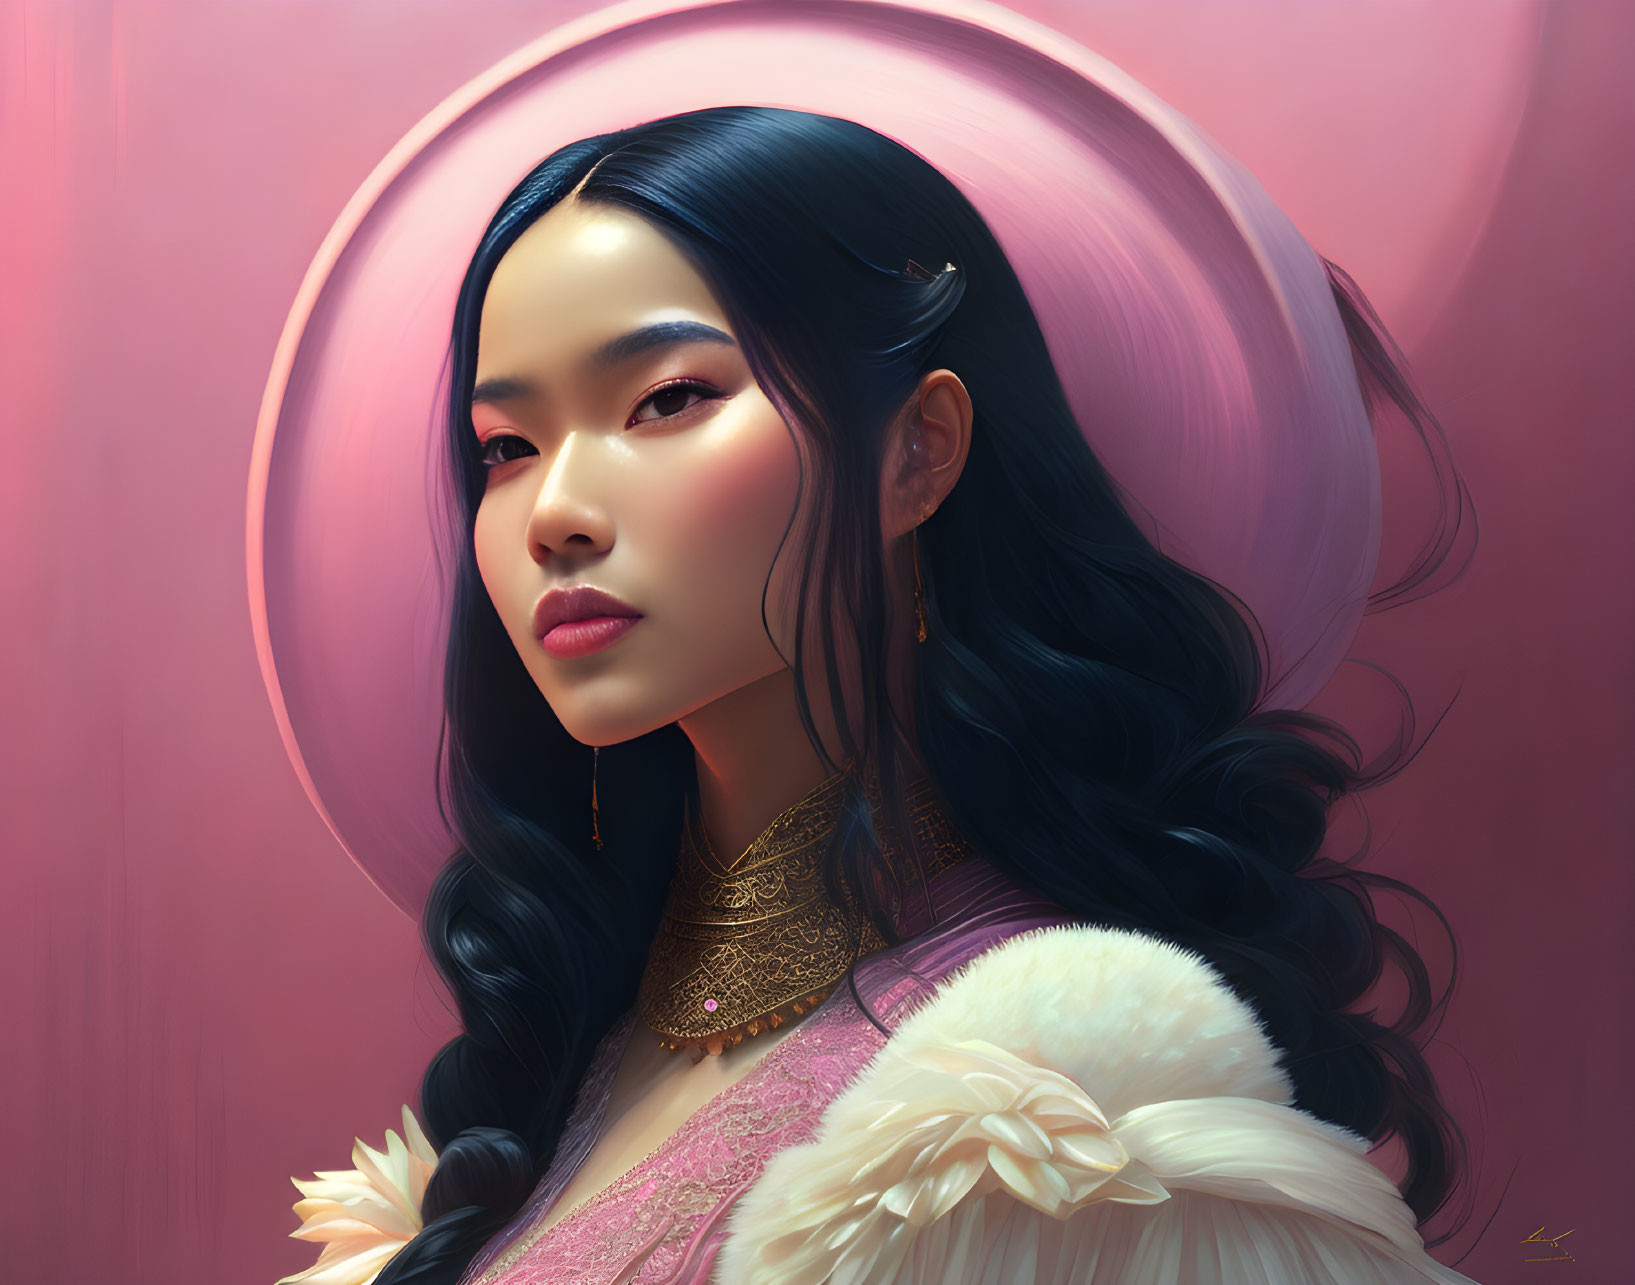 Asian woman in traditional attire with long dark hair and gold necklace in digital portrait